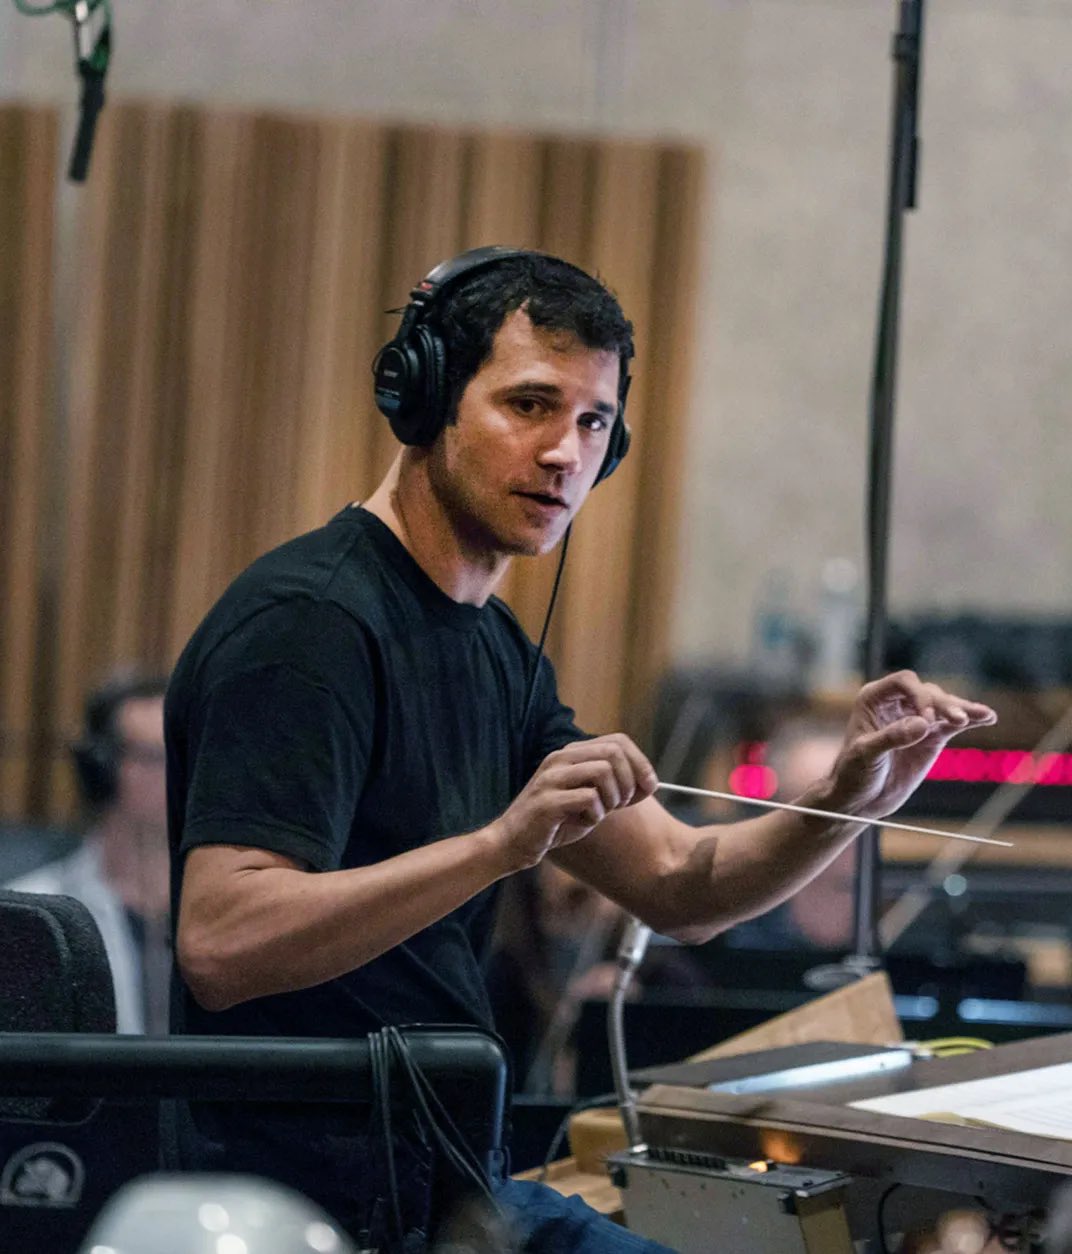 Happy birthday to the one and ONLY Ramin djawadi. May you always bless our ears with your genius work 